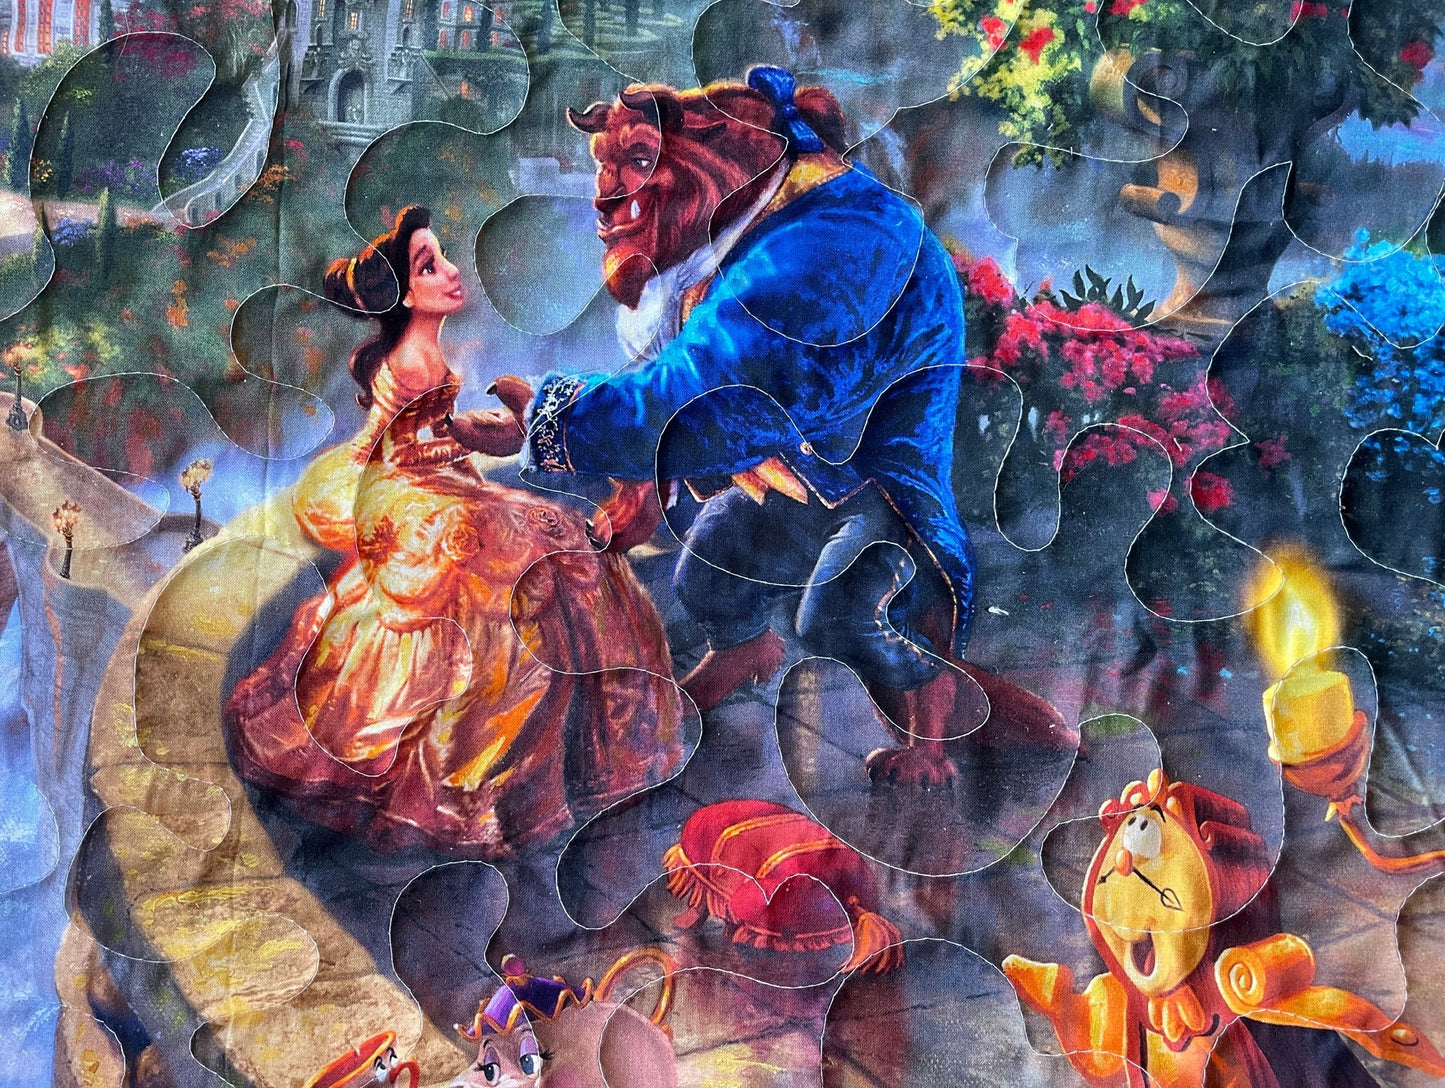 BEAUTY AND THE BEAST FALLING IN LOVE Inspired Quilted Blanket 36"x44" Digital Printed Fabric